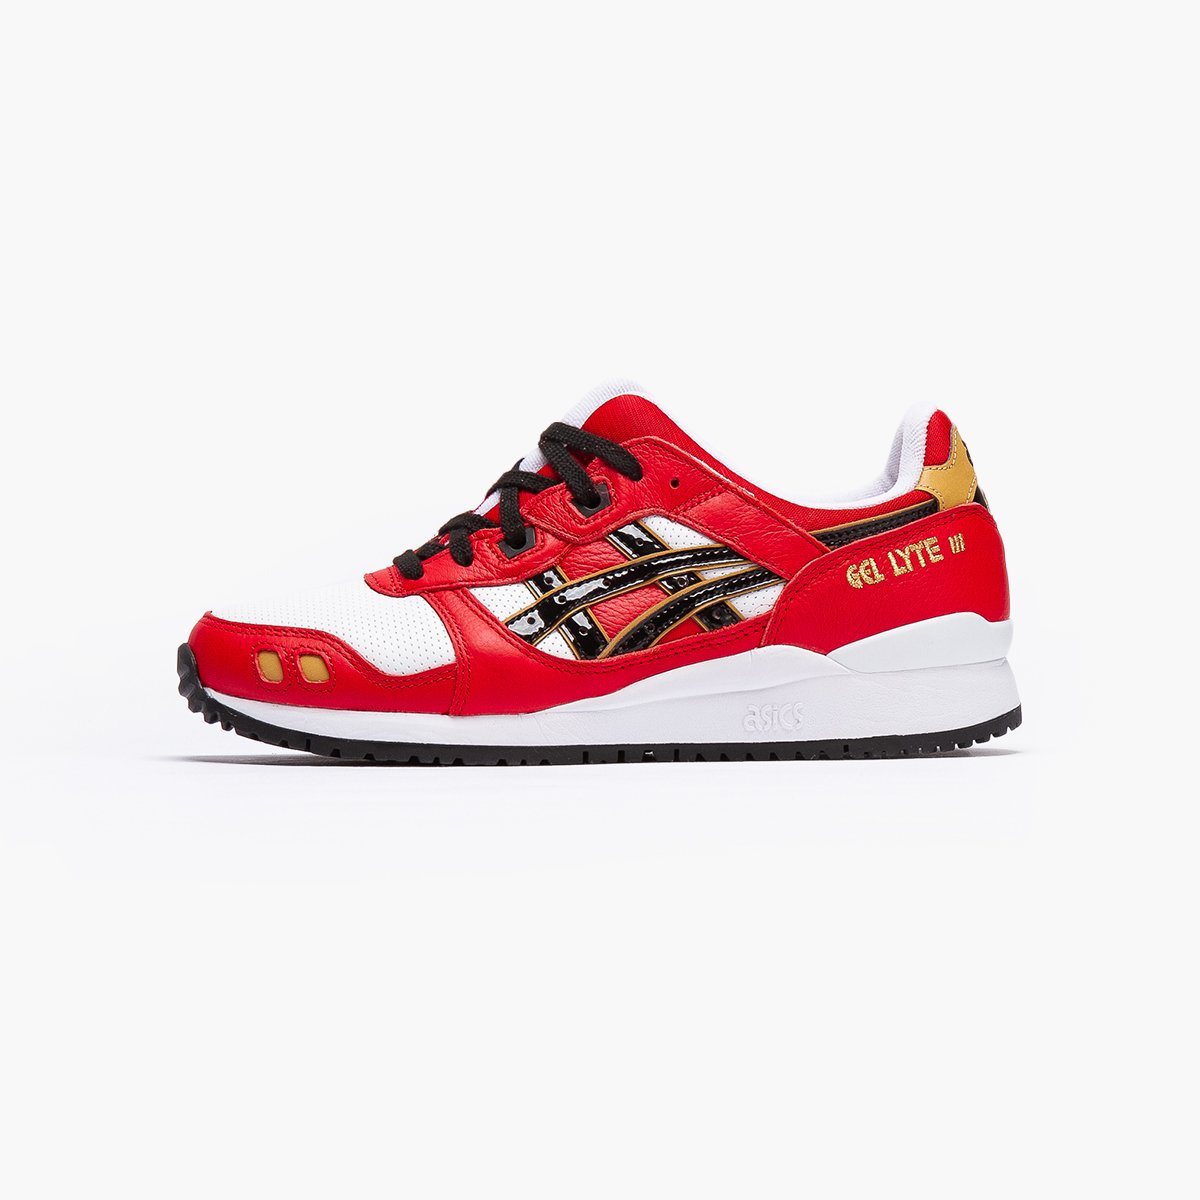 Asics Lyte III OG Daruma Dolls now at SUEDE SUEDE Store